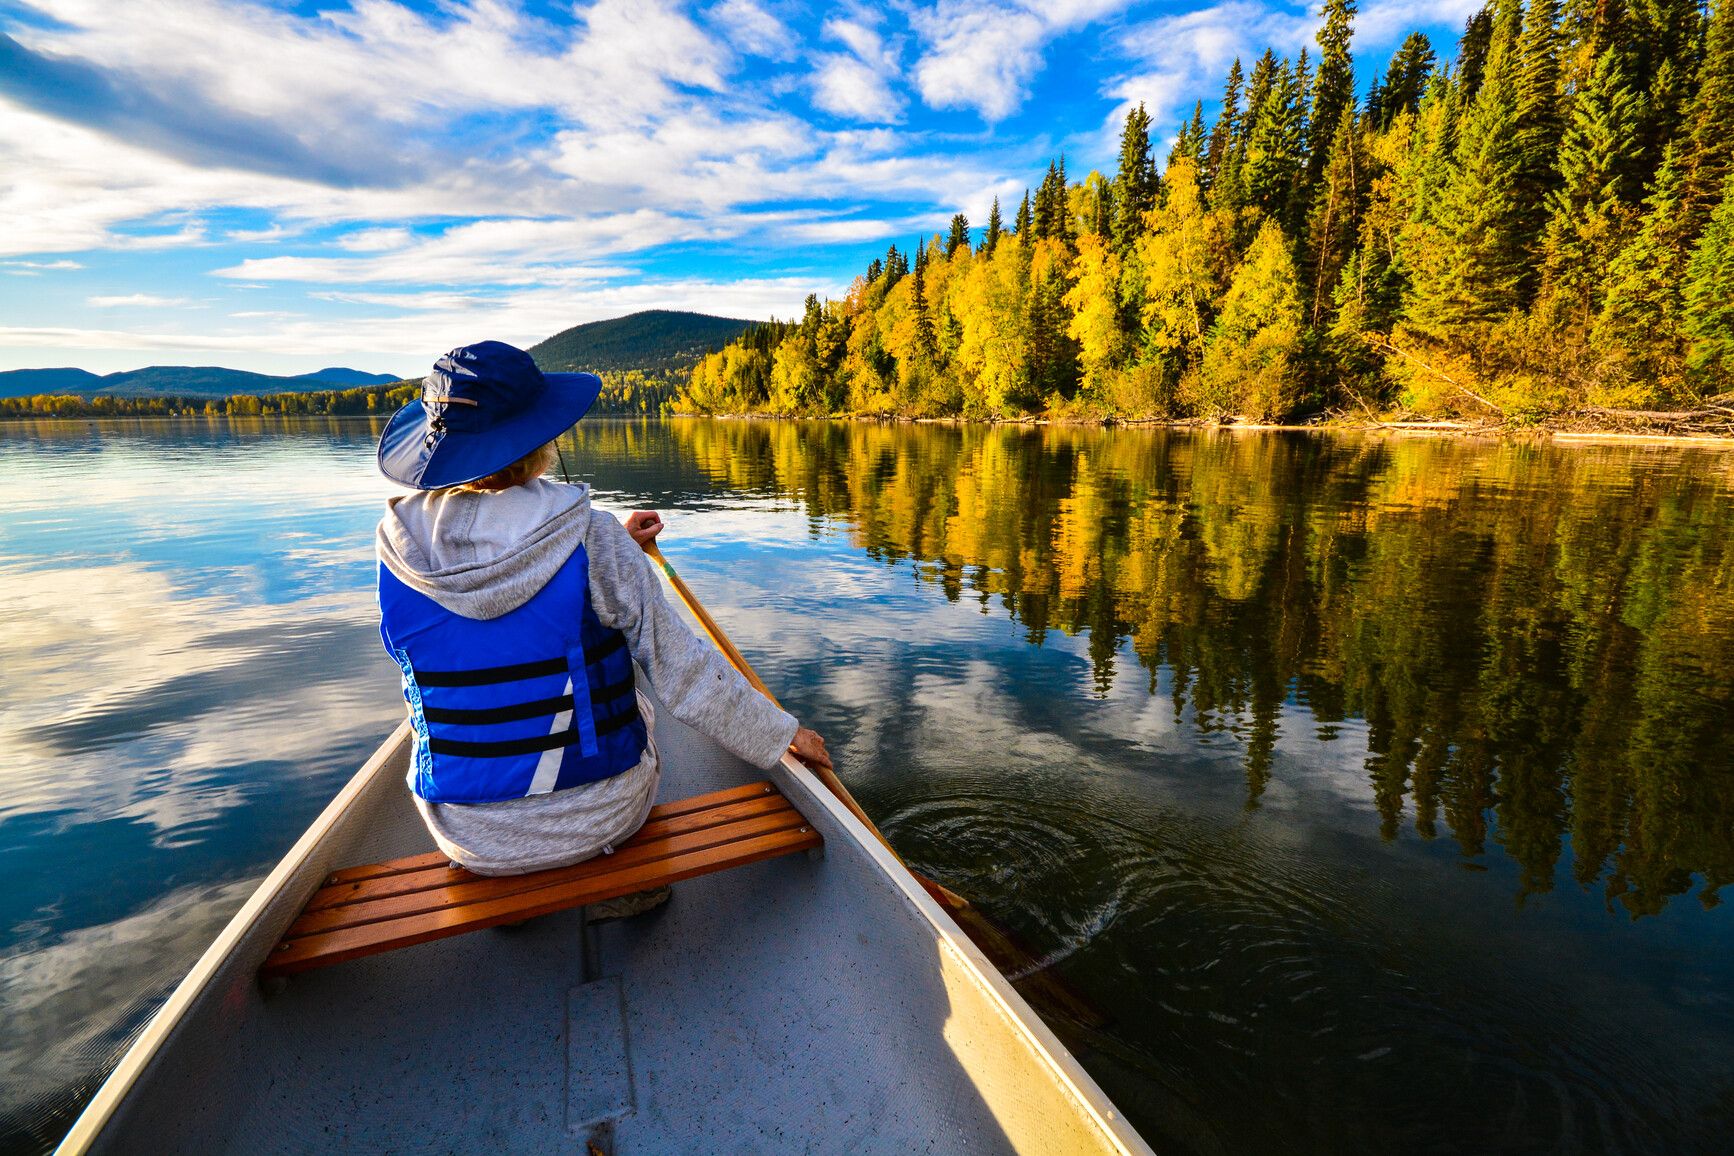 Paddling Bowron Lake as it reflects the vibrant autumn trees, mountains, and forests.